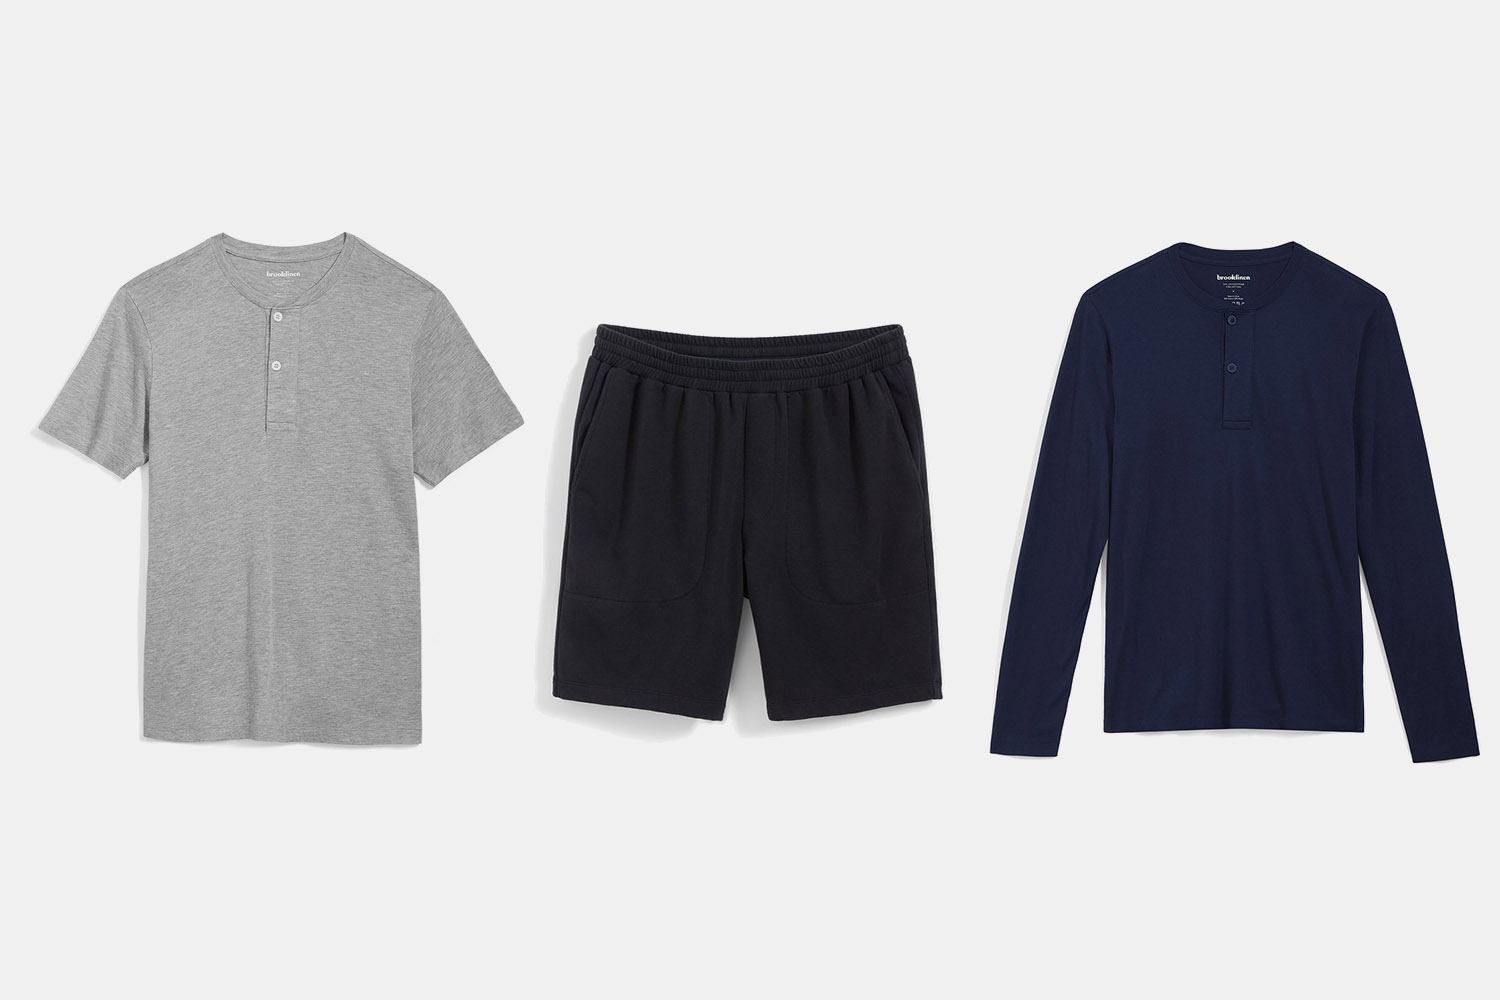 Deal: Spend $100 or More at Brooklinen and Get Free Loungewear